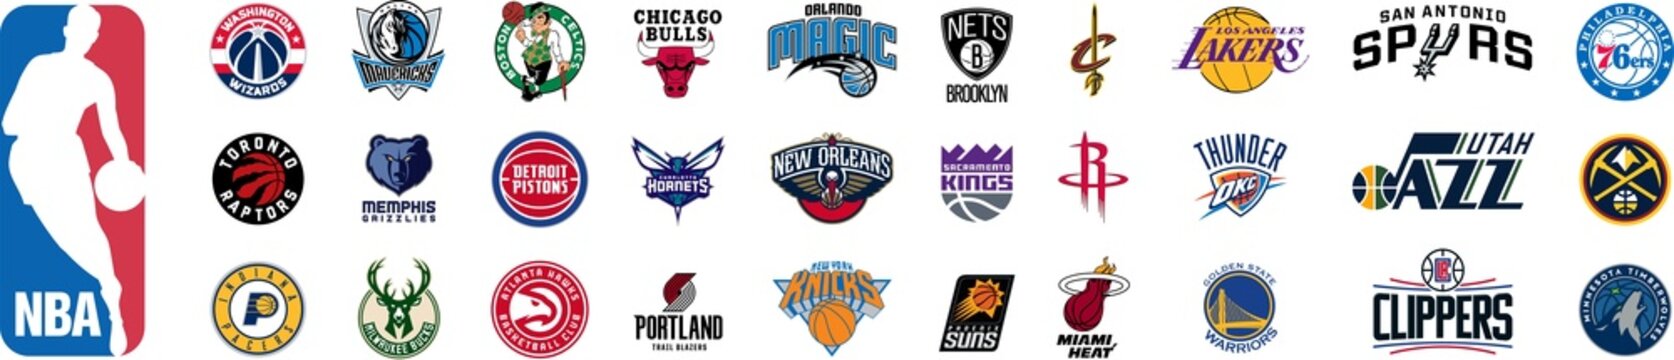 NBA basketball all logos teams set vector. Isolated NBA basket-ball conferences : Lakers, Celtics, Clippers, Knicks, Chicago Bulls, Hawks, Hornets, Wizards, Suns, PNG